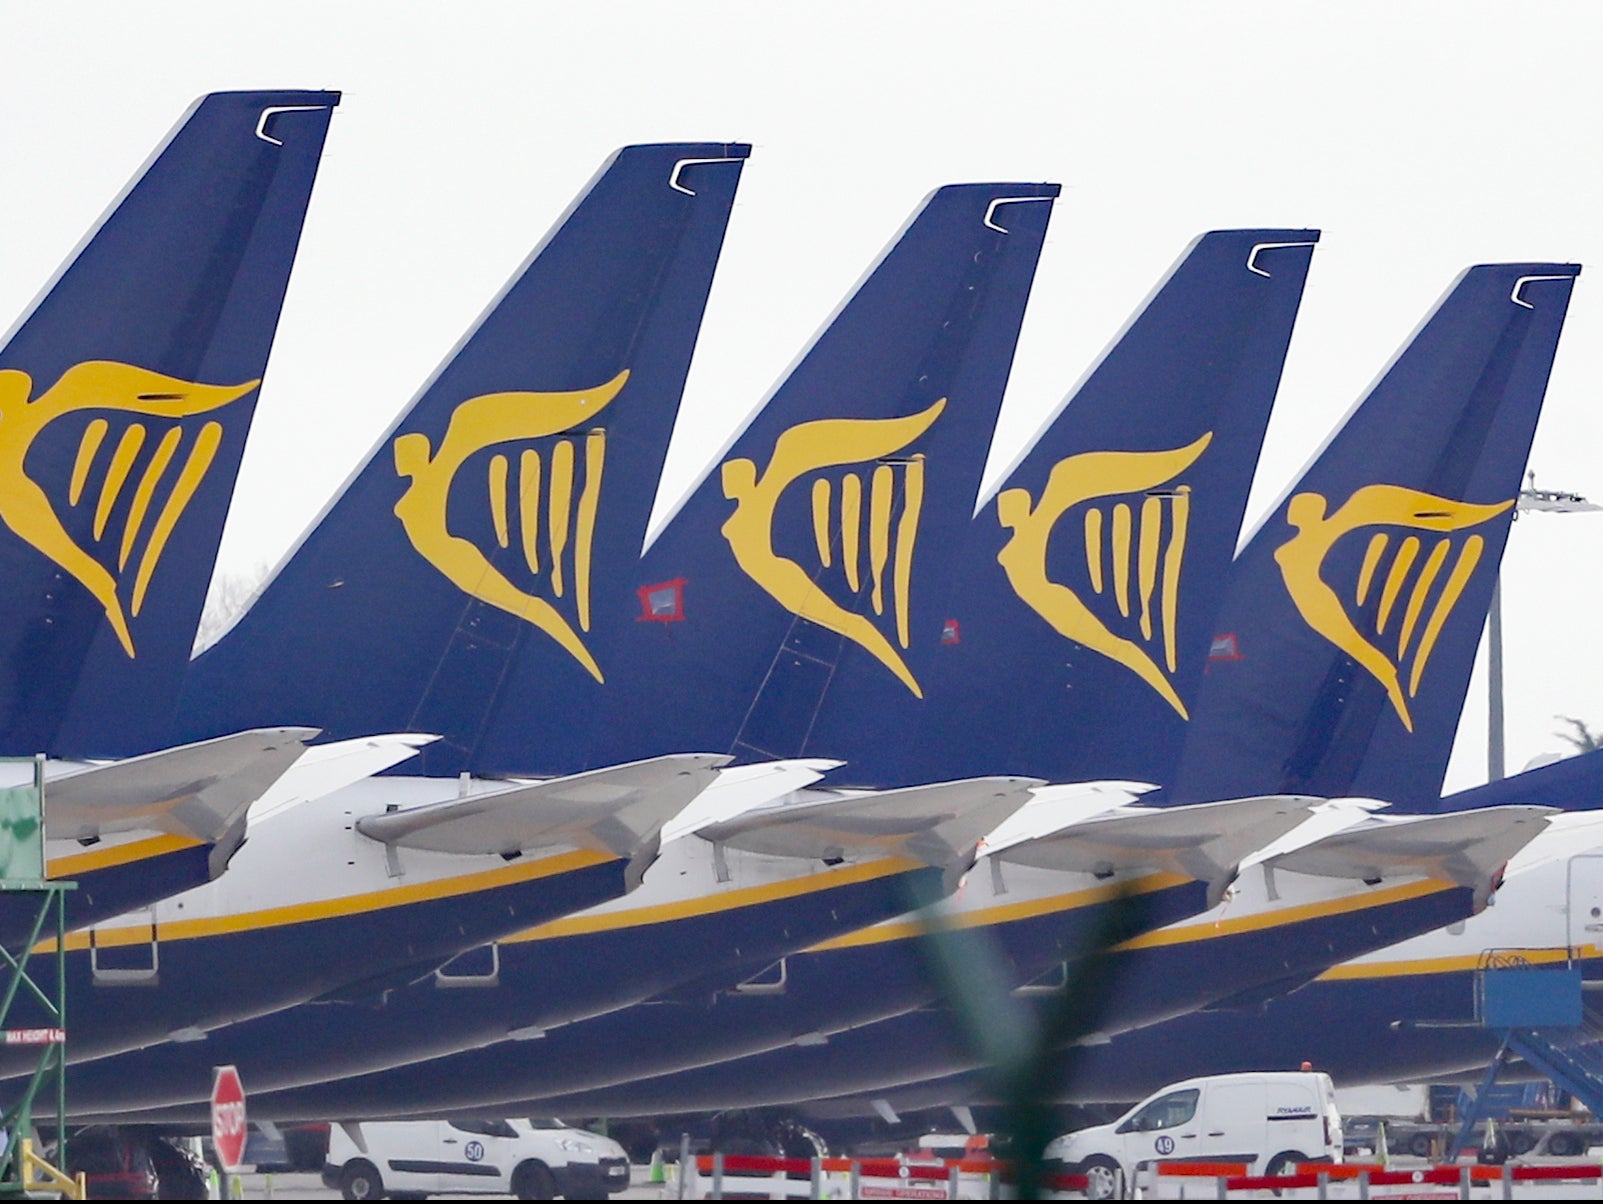 Grounded by the pandemic but Ryanair says bookings are recovering